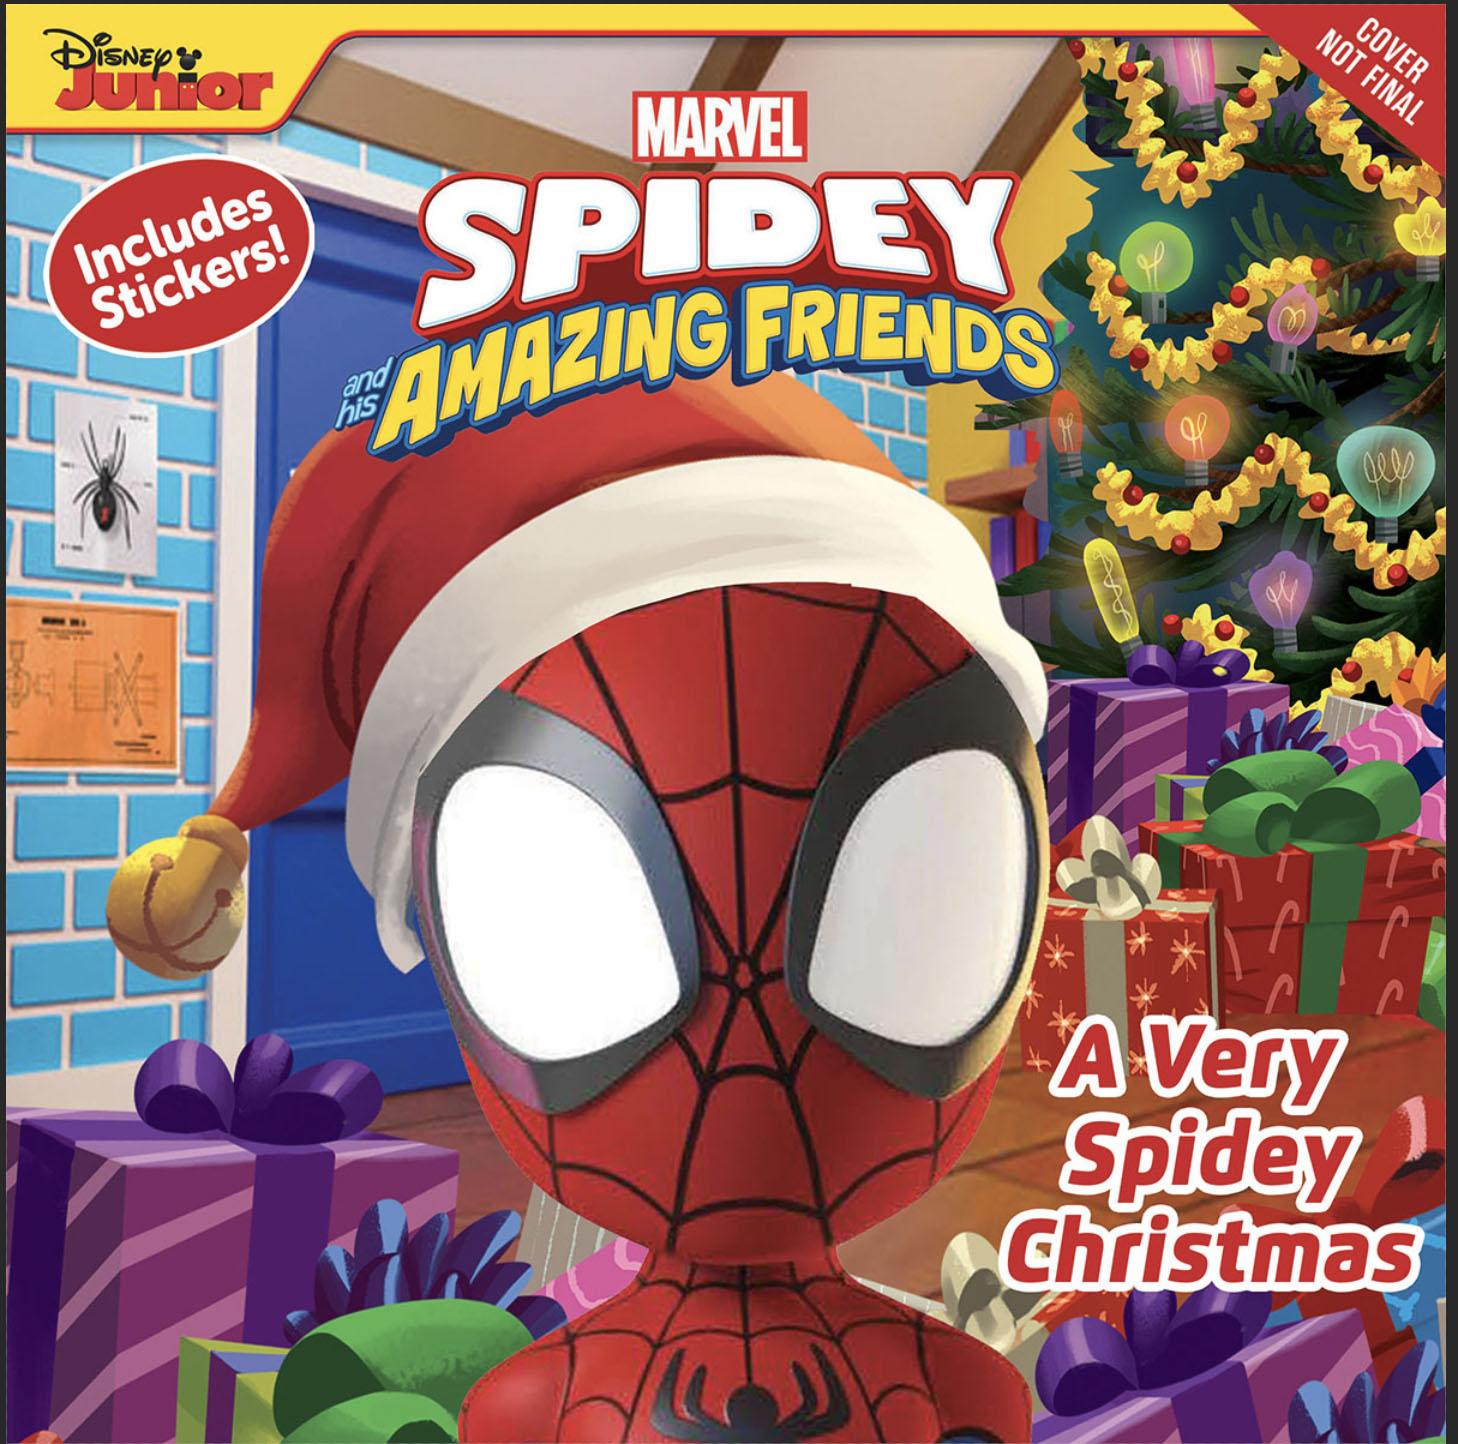 A Very Spidey Christmas Spidey and his Amazing Friends by Steve